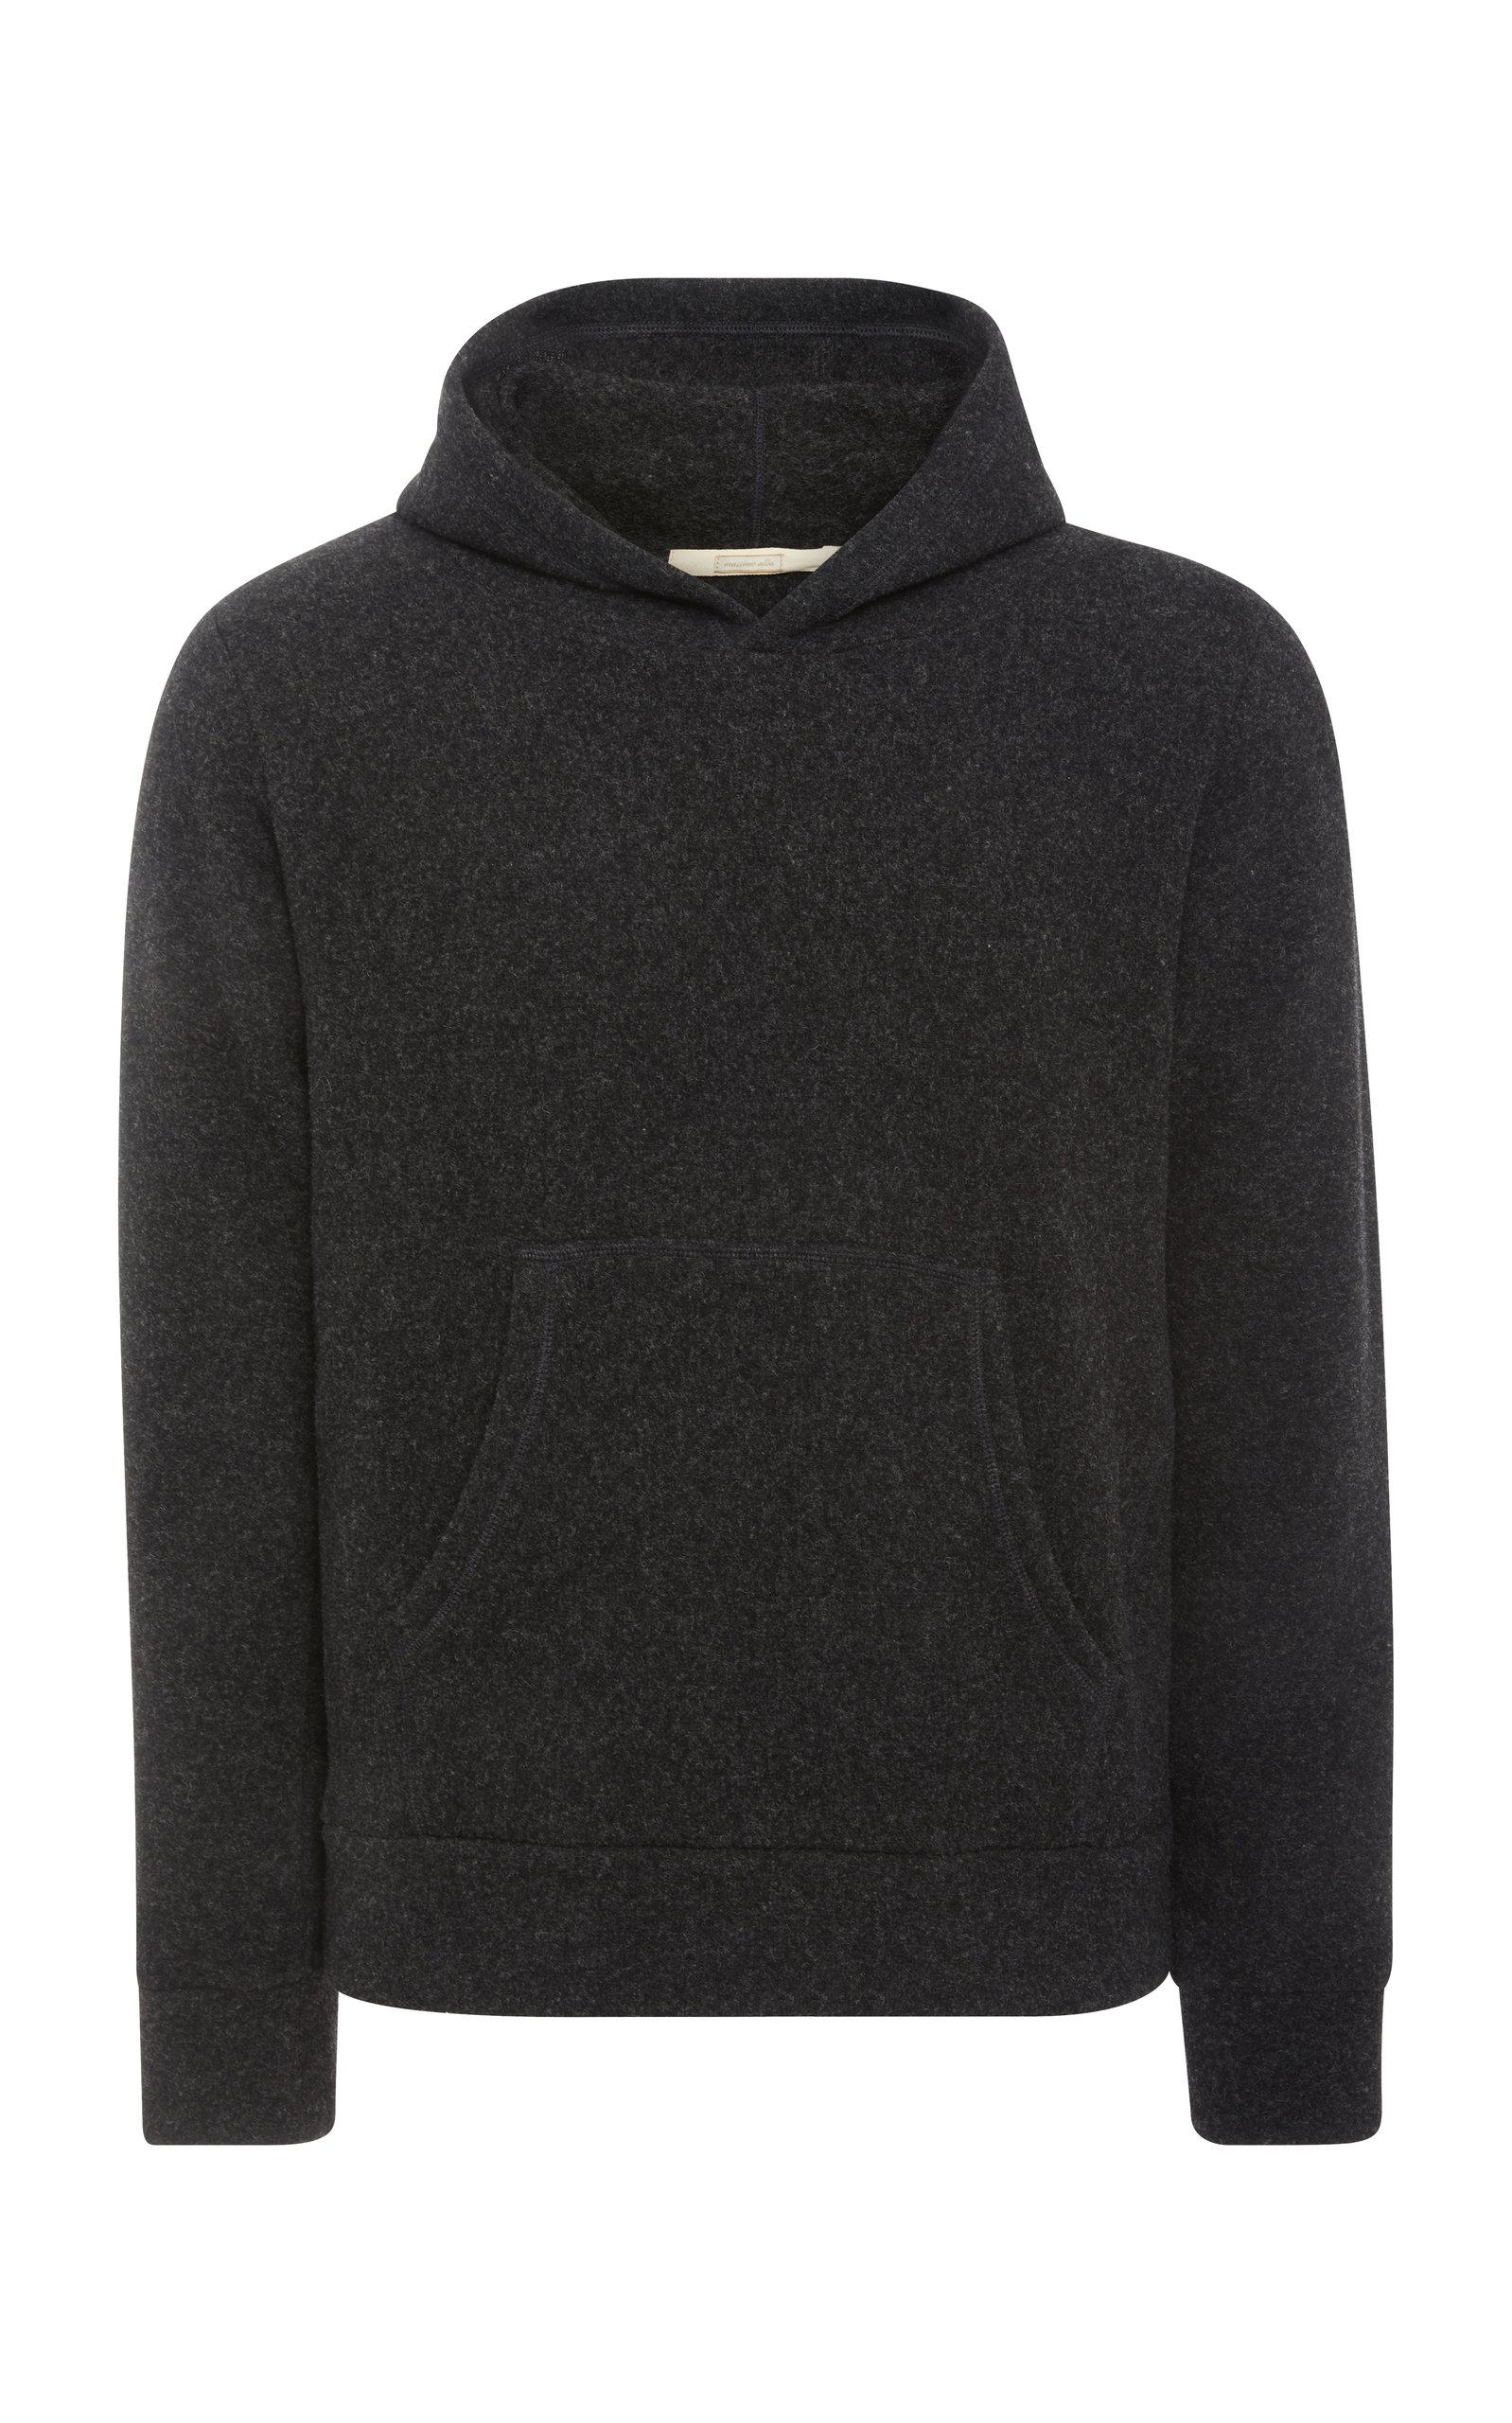 Massimo Alba Cashmere And Yak Hoodie in Grey (Gray) for Men - Lyst